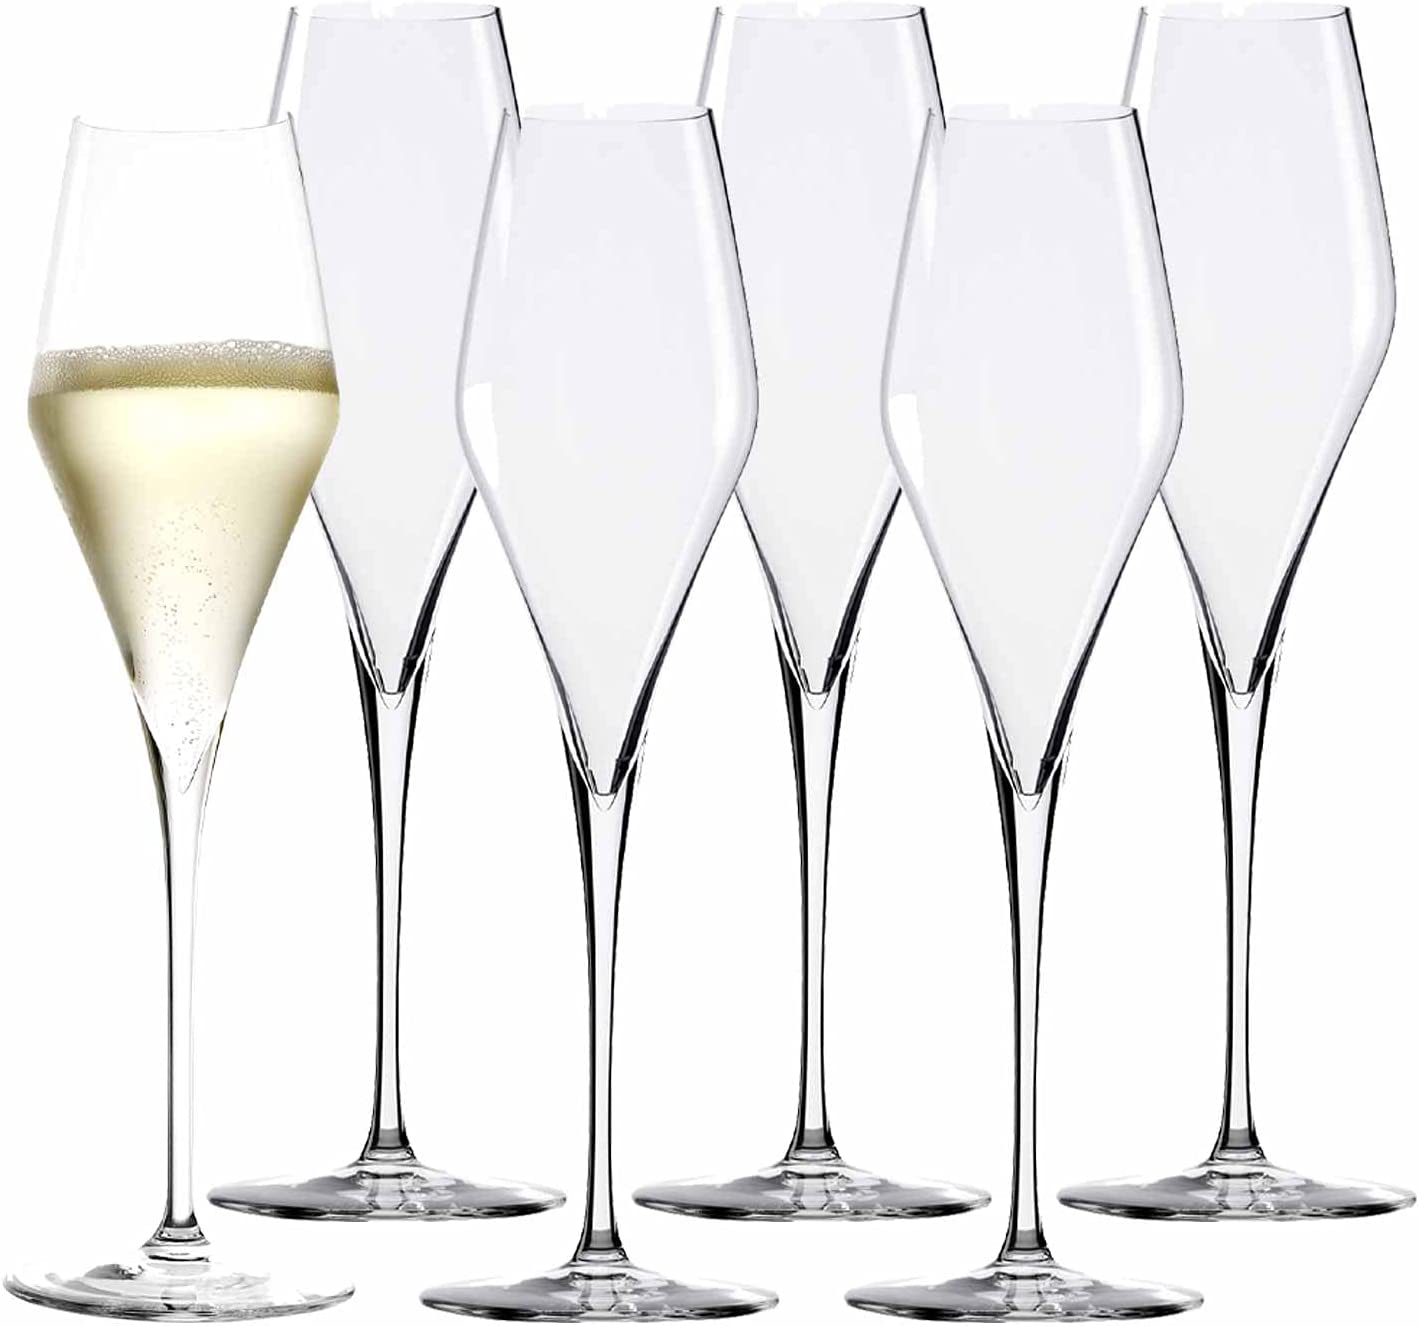 Stölzle Lausitz Champagne Glasses Q1 300 ml Set of 6 in Gift Box Handmade and Mouth-Blown Hand Wash Recommended Highest Quality